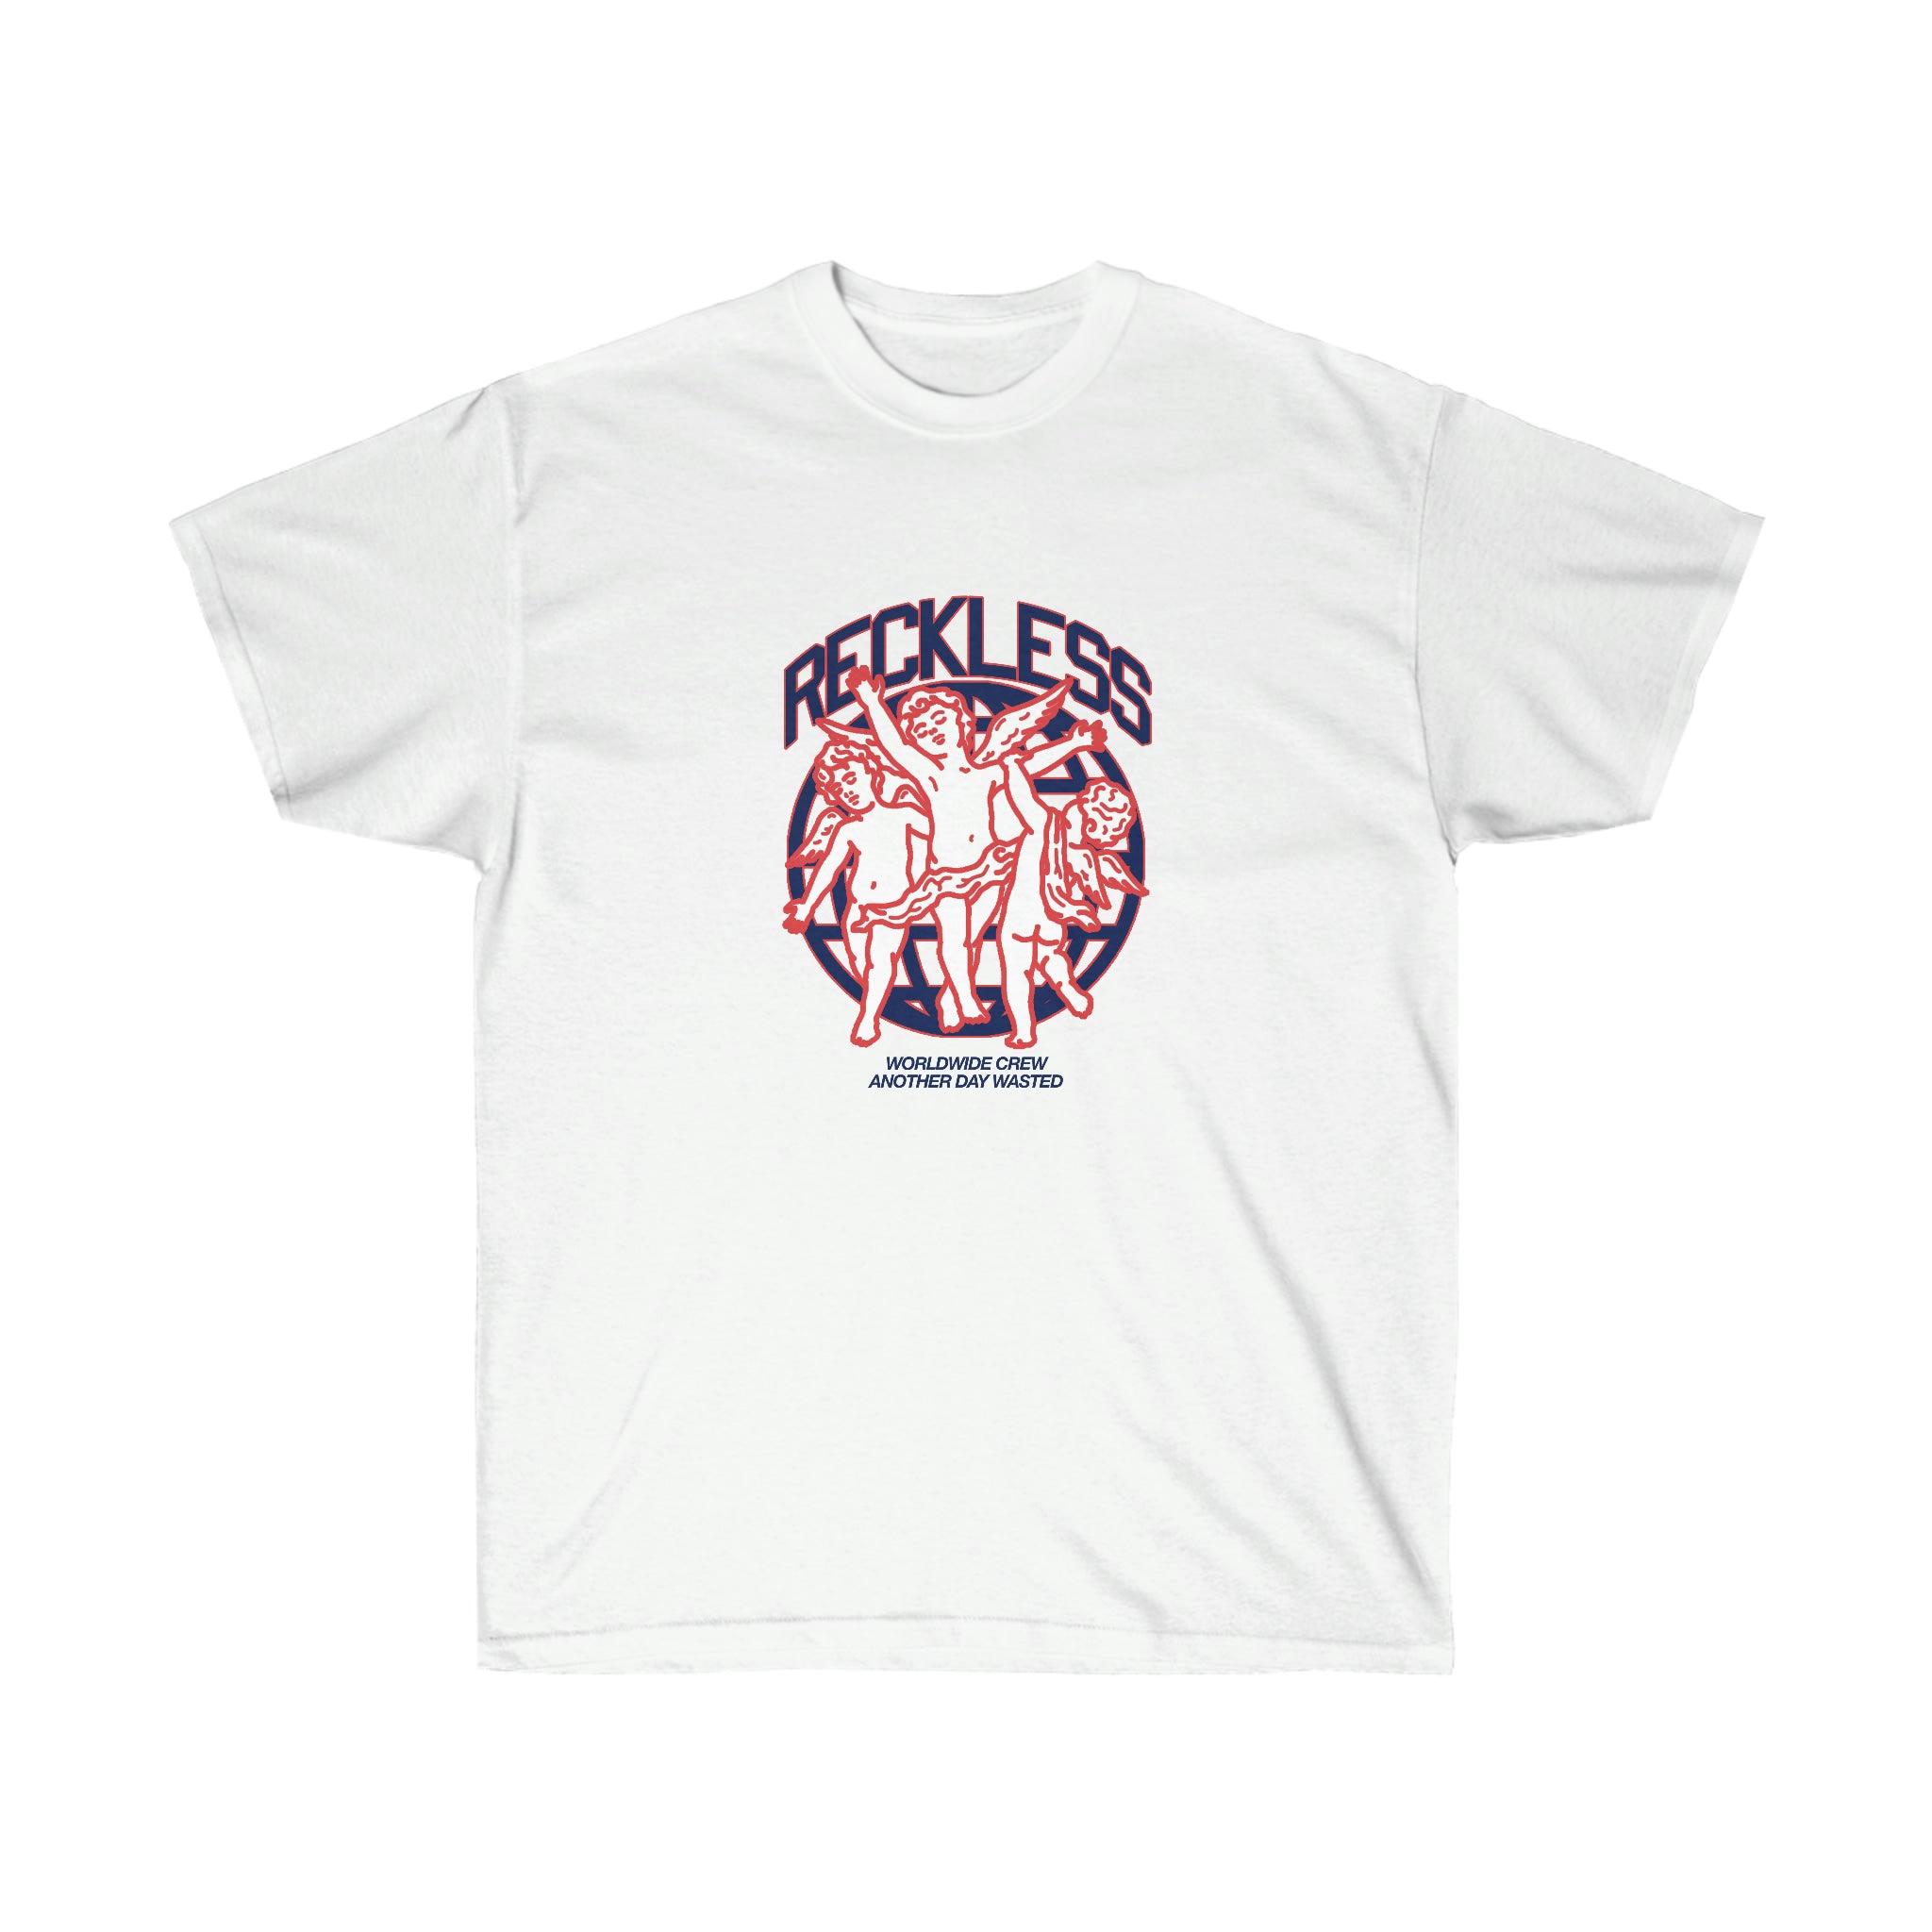 RECKLESS TEE